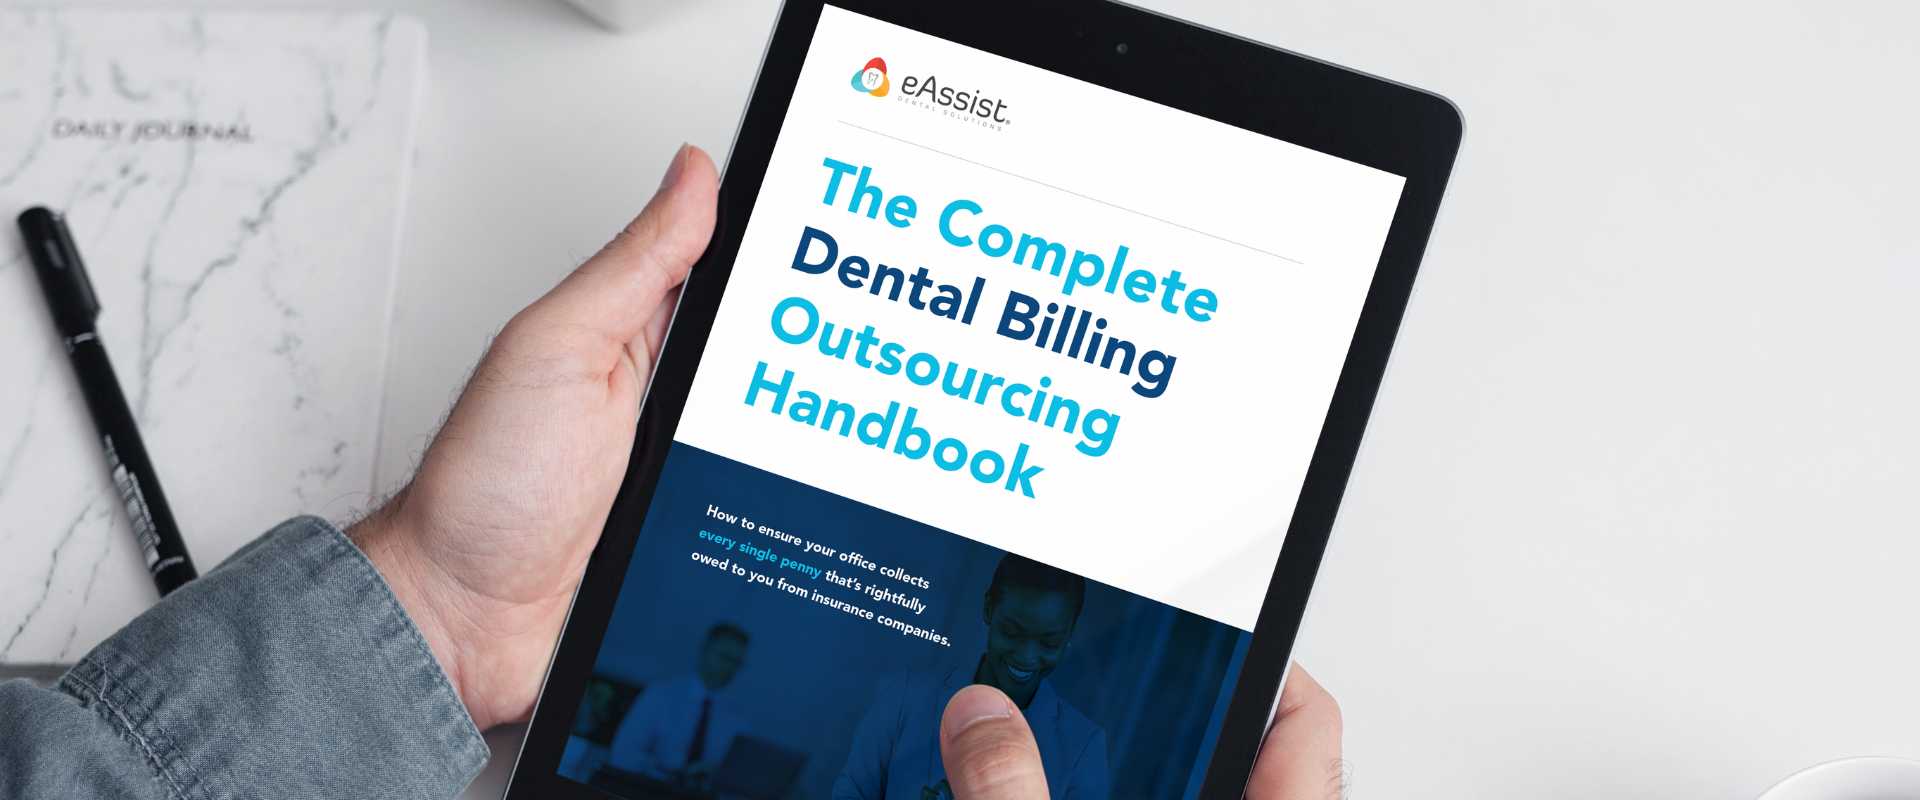 The Complete Dental Billing Outsourcing Handbook eBook Preview